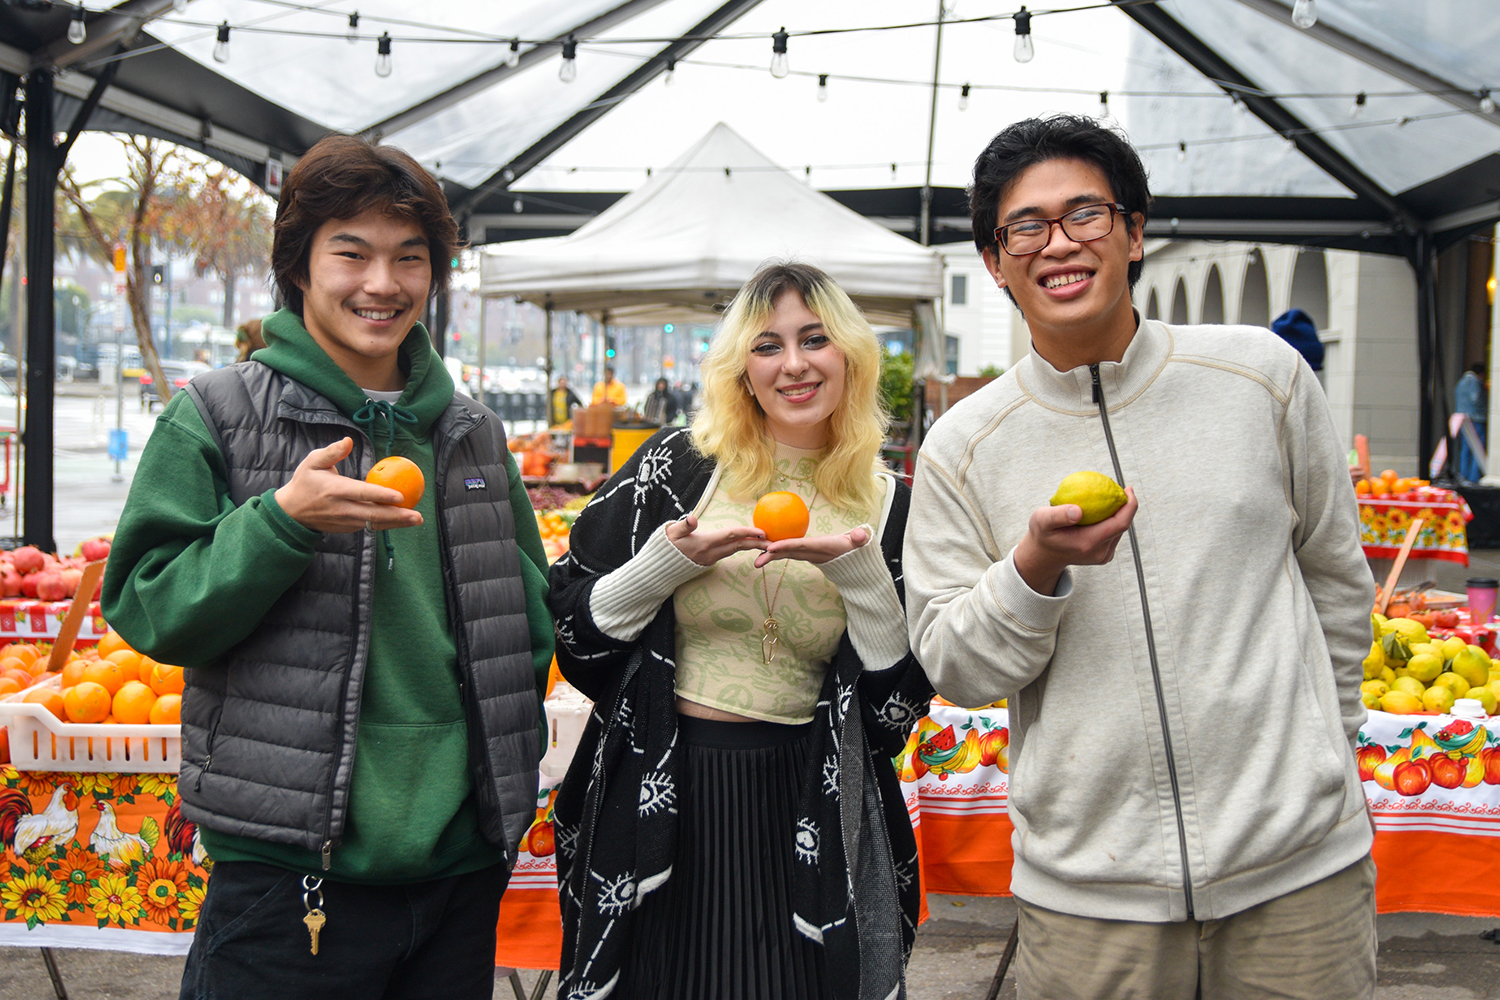 FWT interns in the farmers market, from left to right: Yungmin, Sofia, and maybe: Rayyane